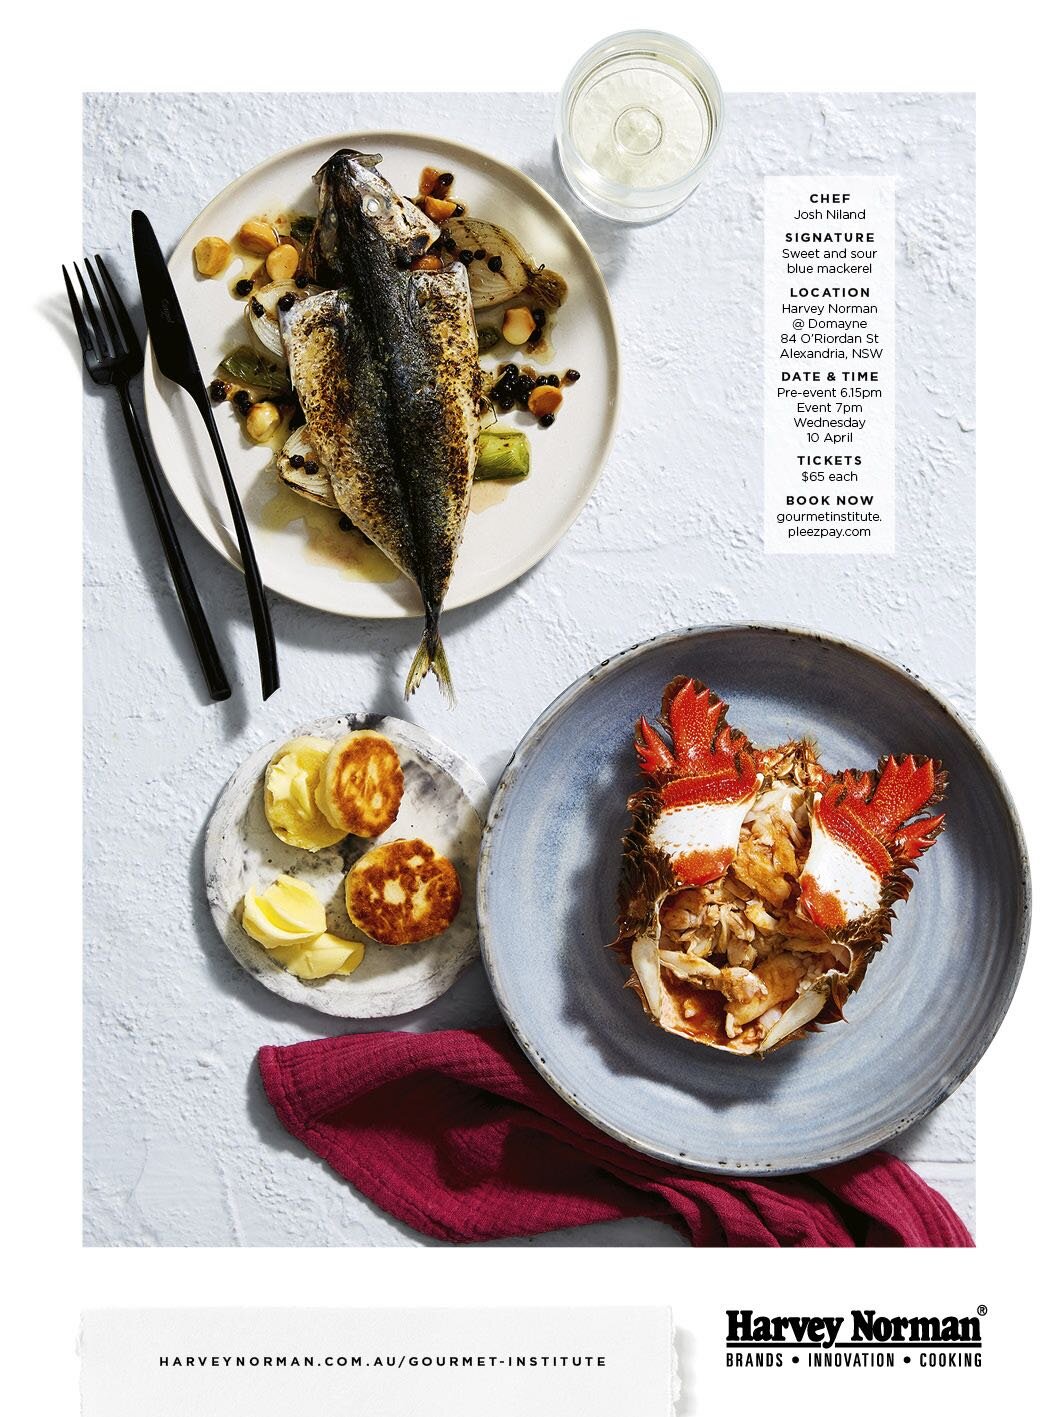  The talented figure behind Saint Peter and Fish Butchery uses his inventive approach to sustainable seafood in this recipe. His much-loved sweet and sour blue mackerel and hand-picked spanner crab with crumbed garfish yoghurt tartare and herb salad.